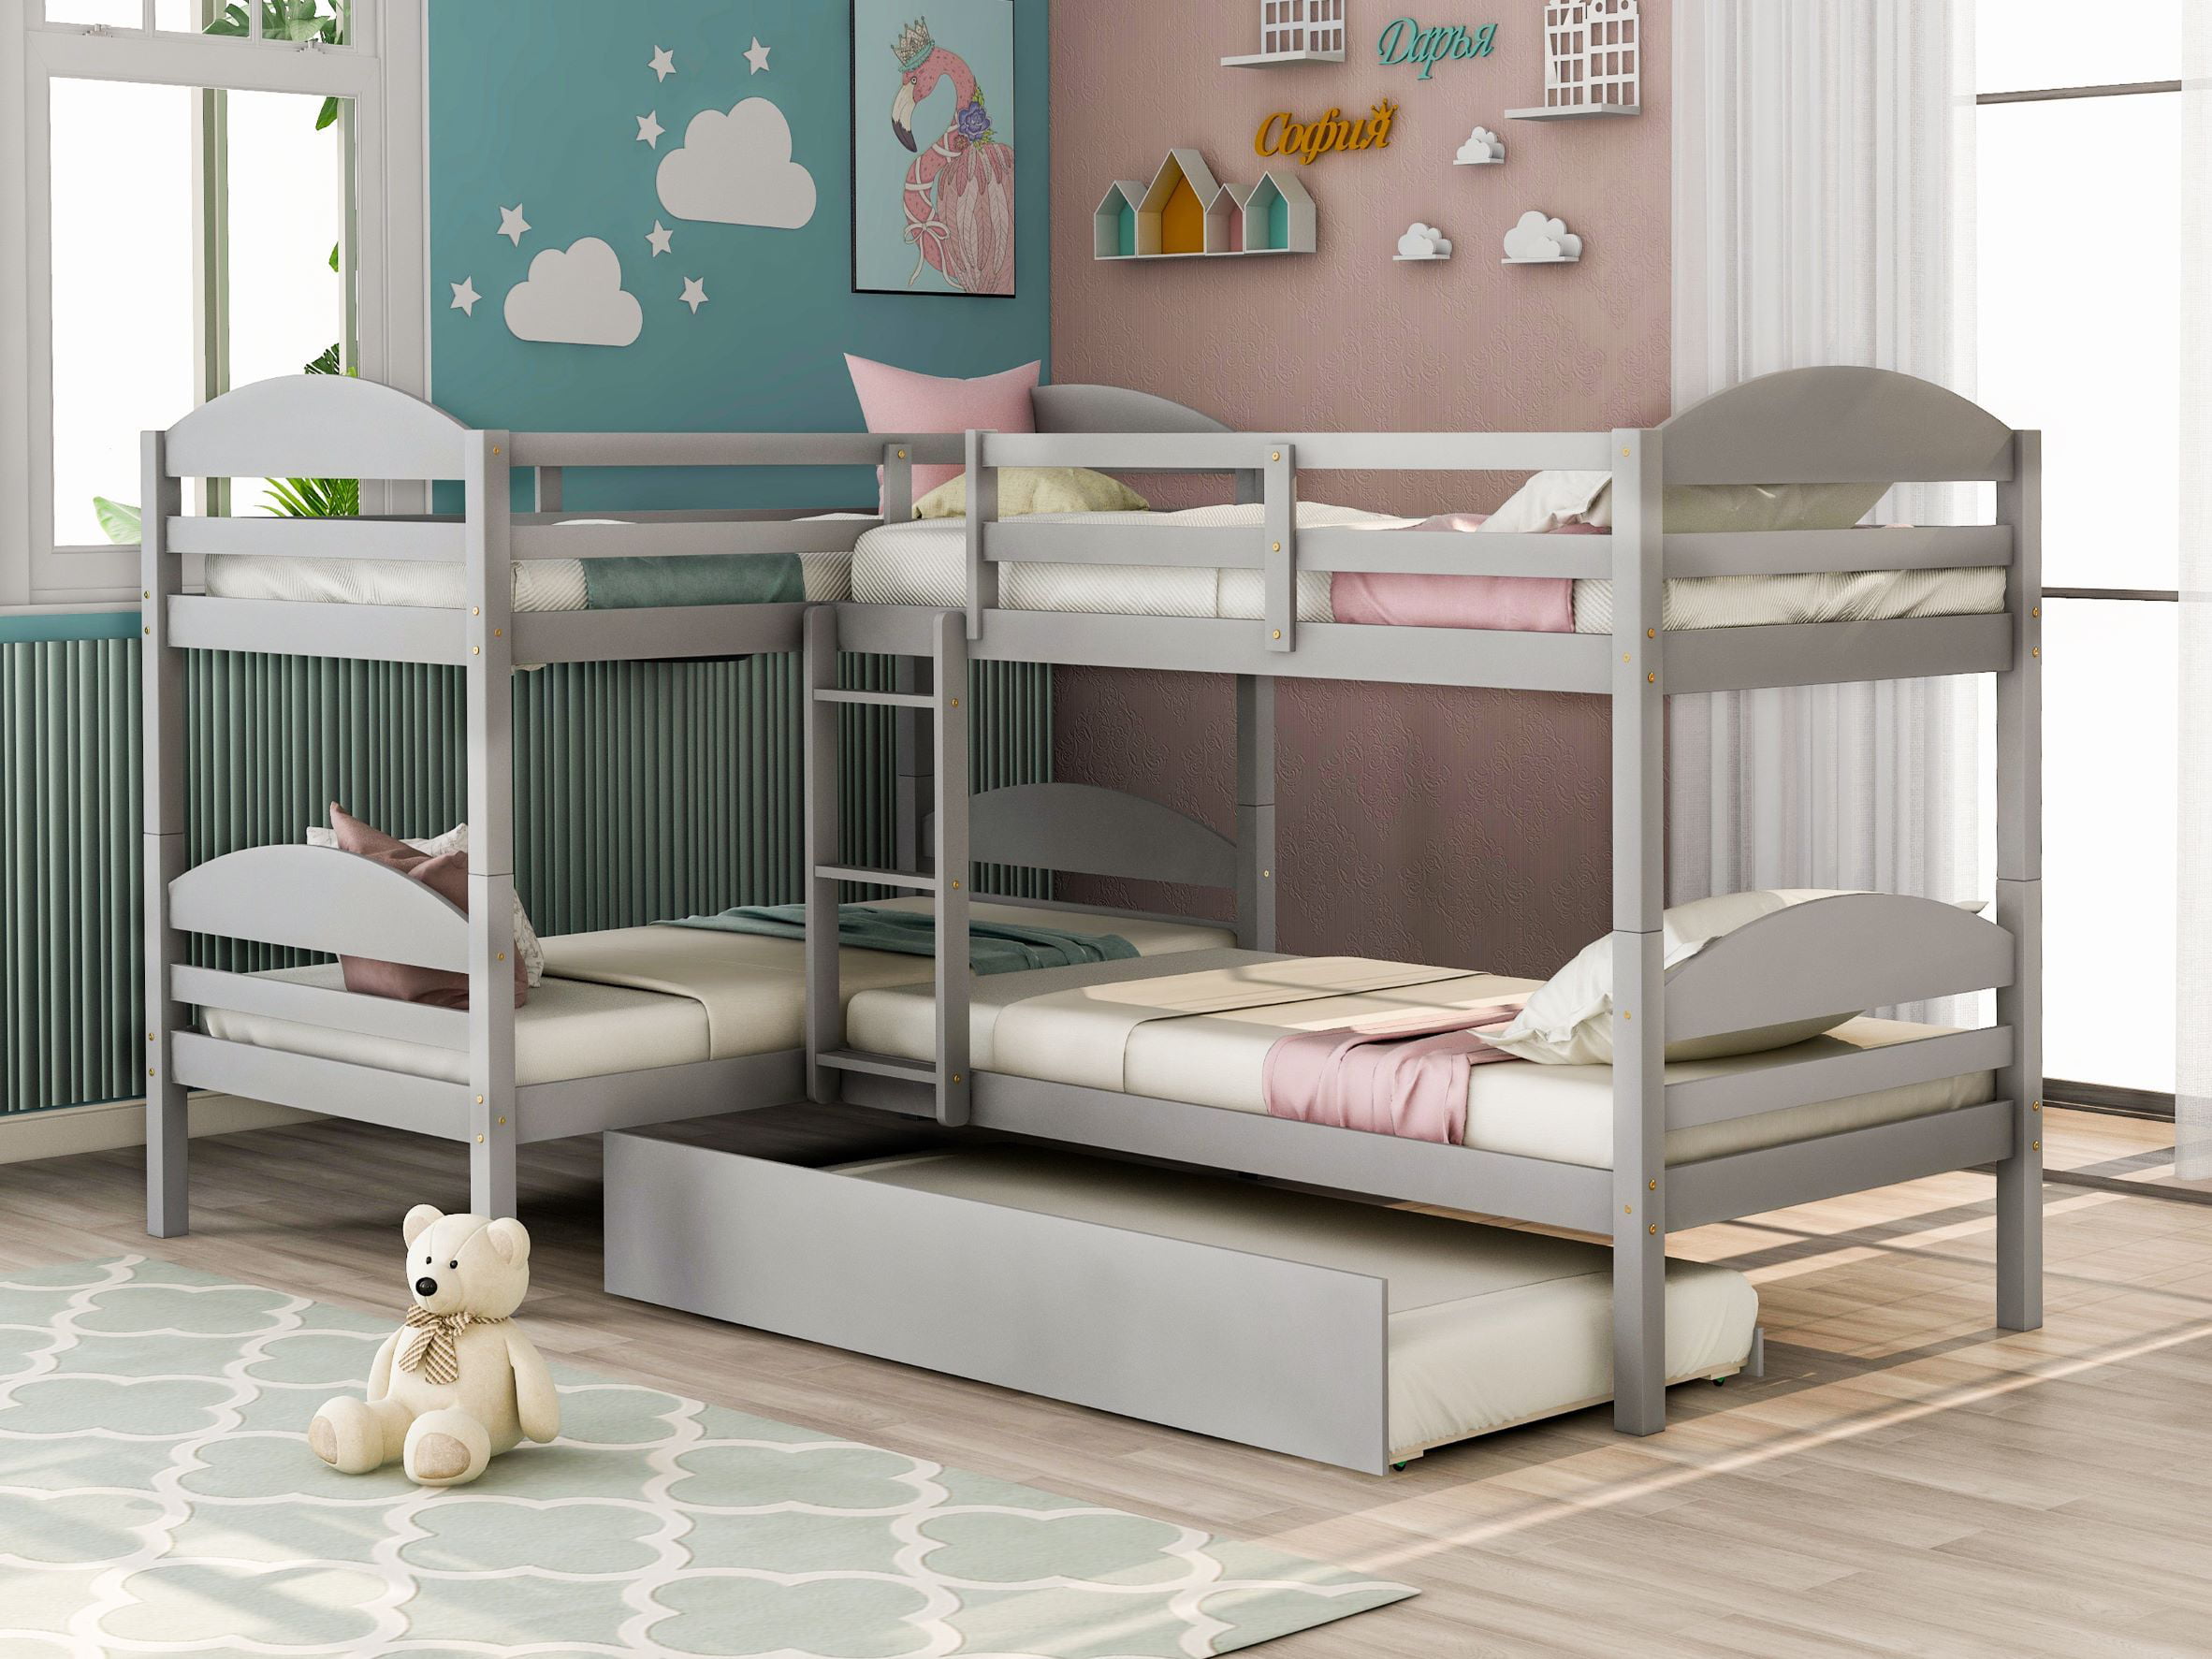 L Shaped Bunk Bed Kids Deds For 4, Isabelle Twin Over Twin Bunk Bed With Storage